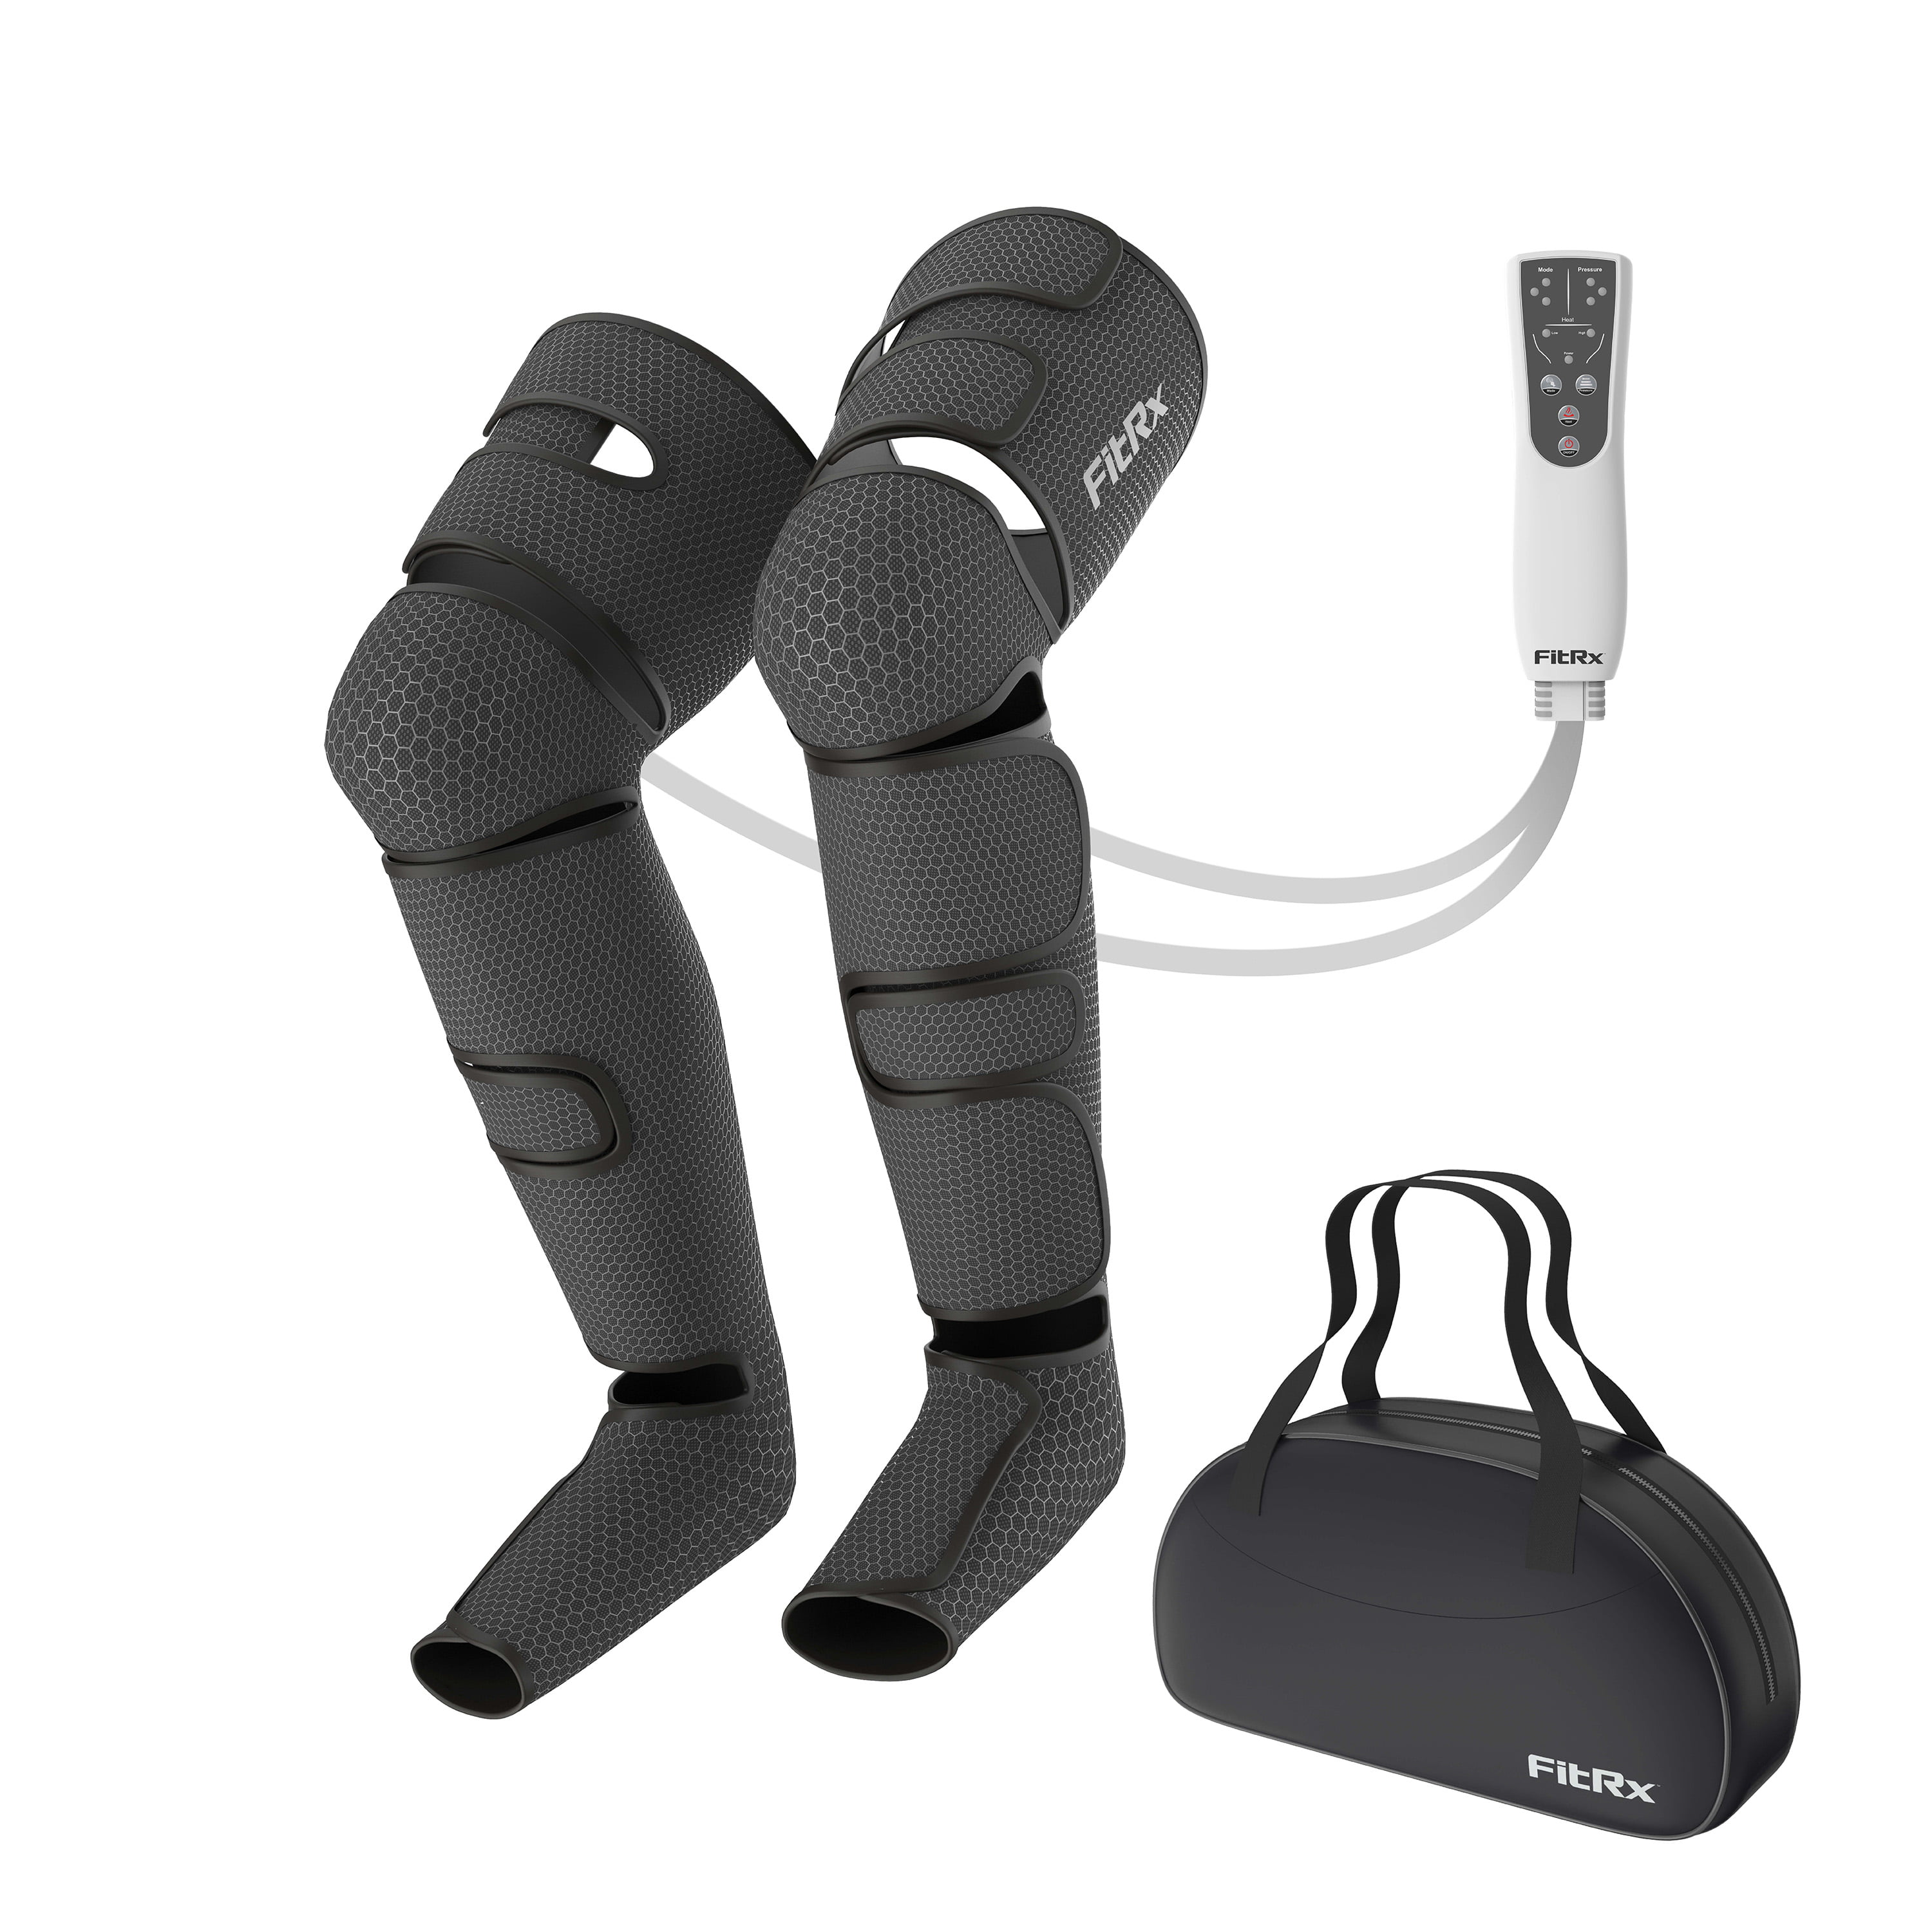 FitRx Recover Max Leg Compression Foot Massager with Multiple Massage, Intensity, and Heat Levels $89.88